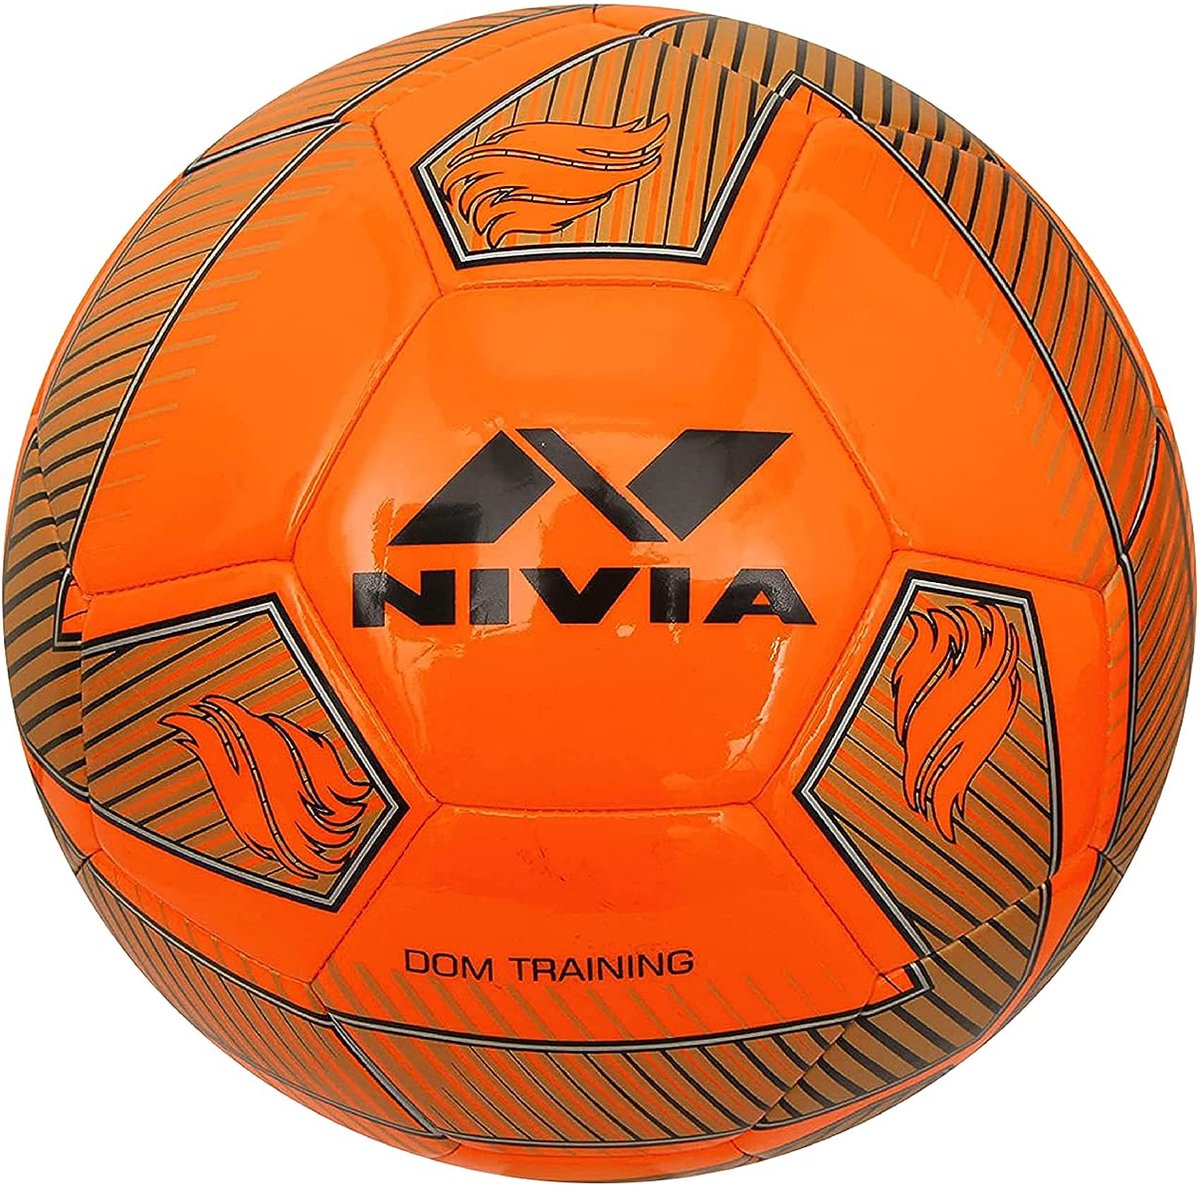 Nivia DOM08 Training Football (Orange, Size-5) Material-PU/TPU | Soccer Ball | High Speed | All surface | Machine Stitched | Ideal For: Training/Match